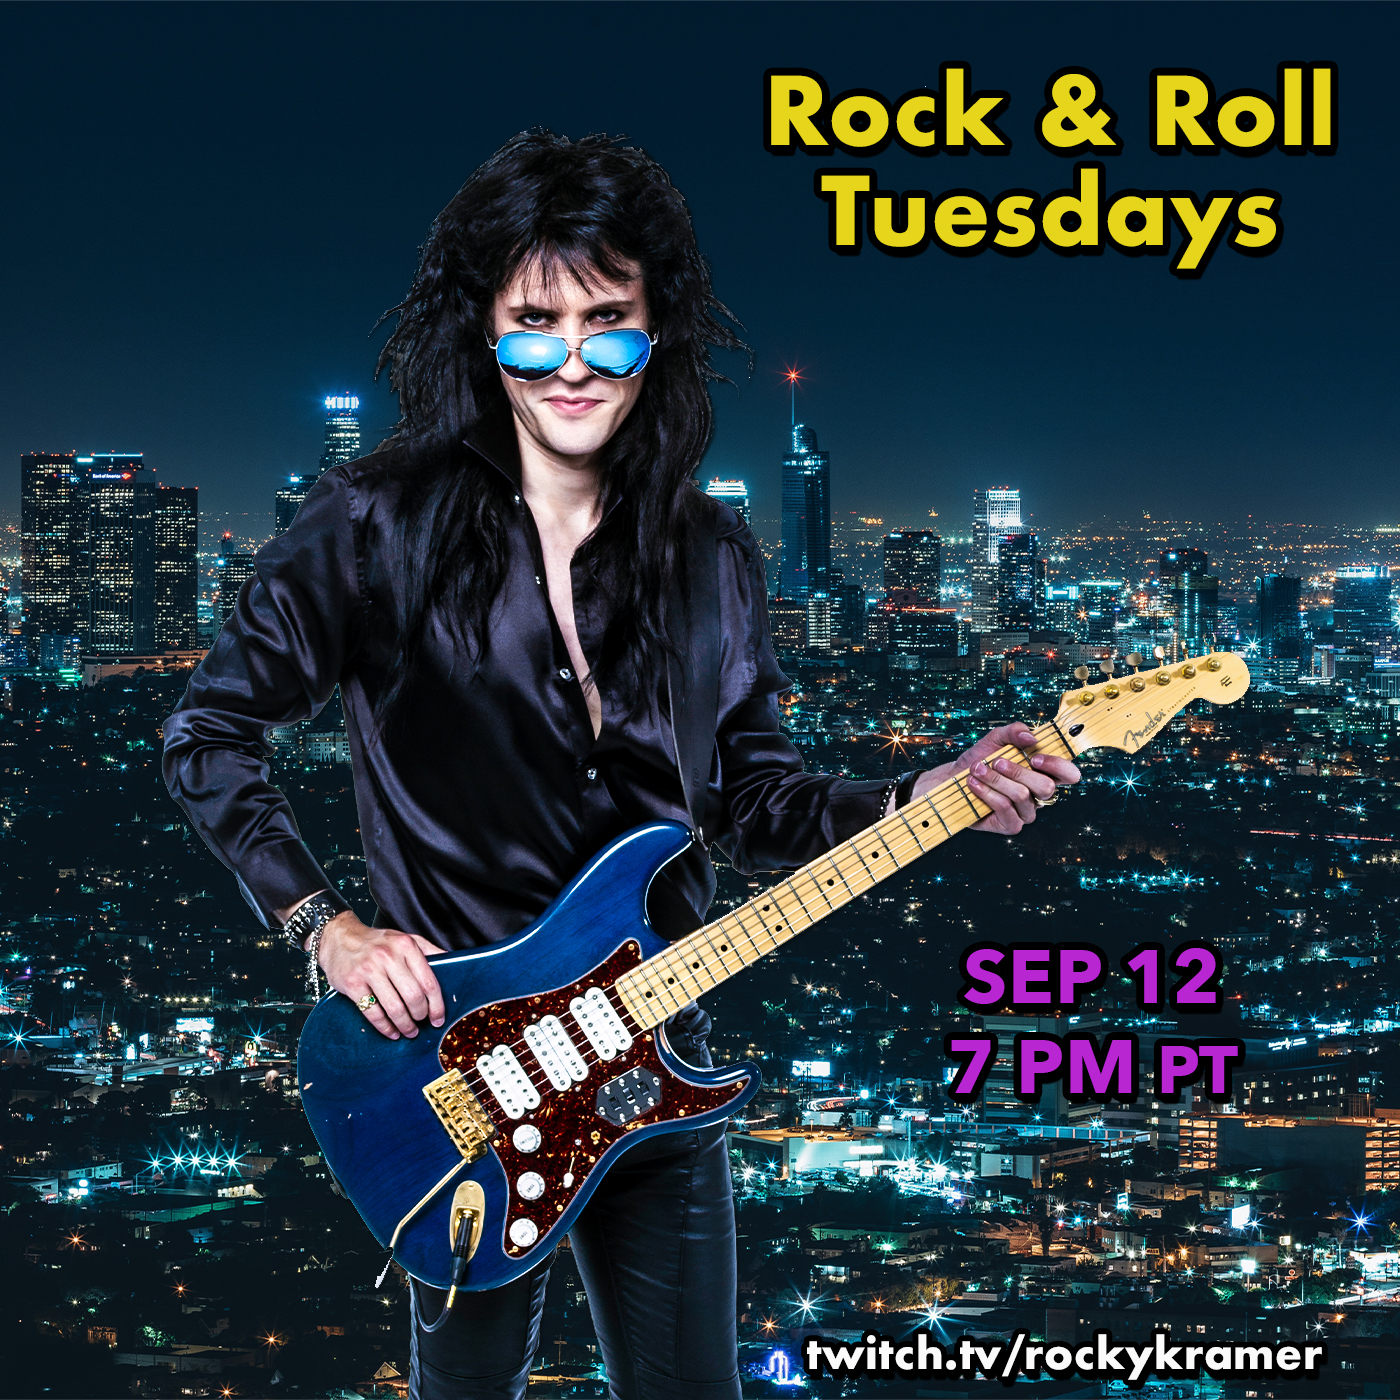 Rocky Kramer’s Rock & Roll Tuesdays Presents “Rock & Roll Cities” 9/12/23, 7 PM PT on Twitch